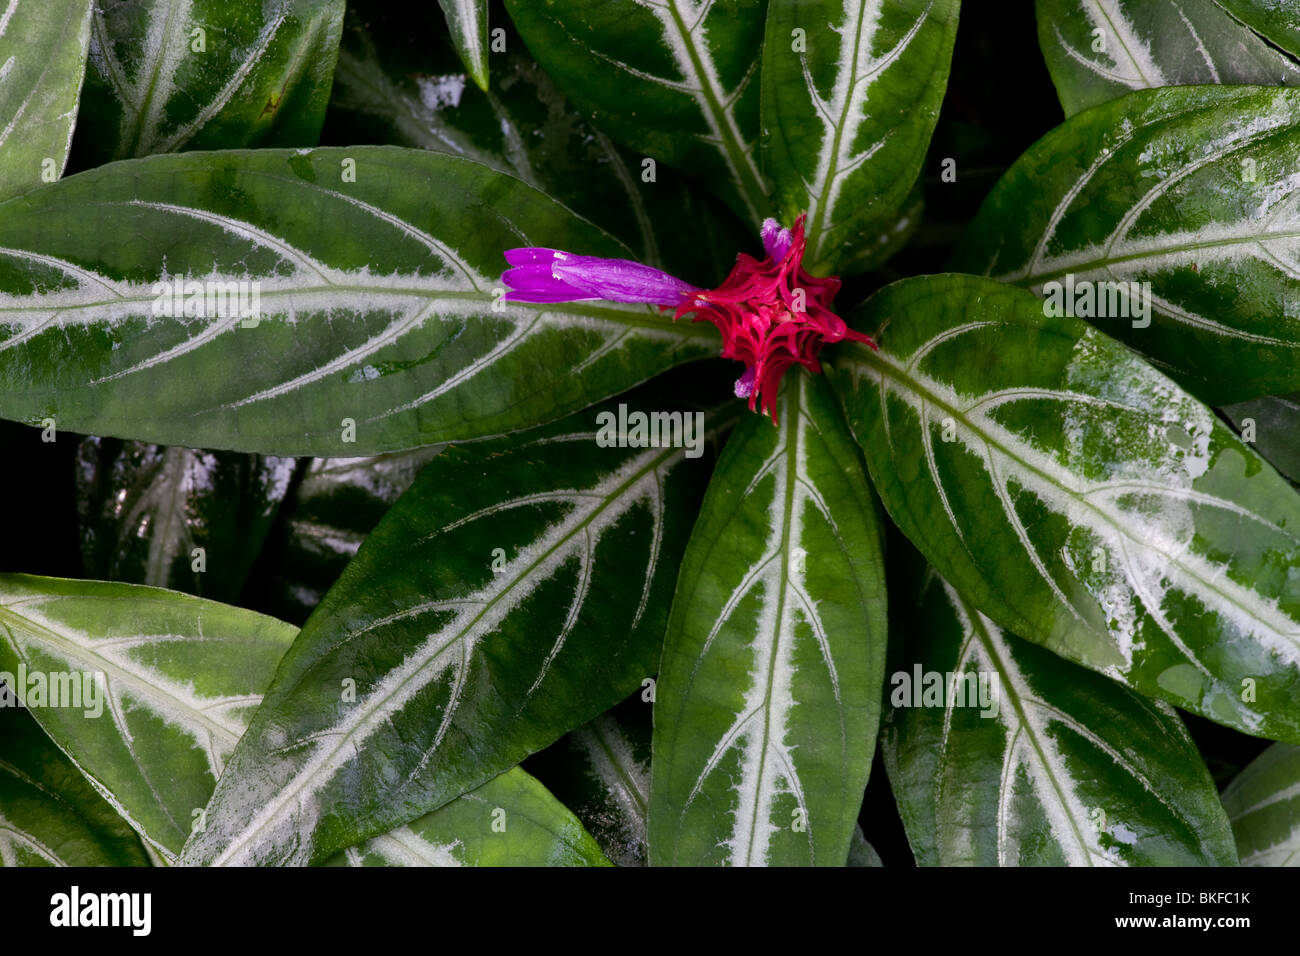 Close-up of a Justicia flower in bloom Stock Photo